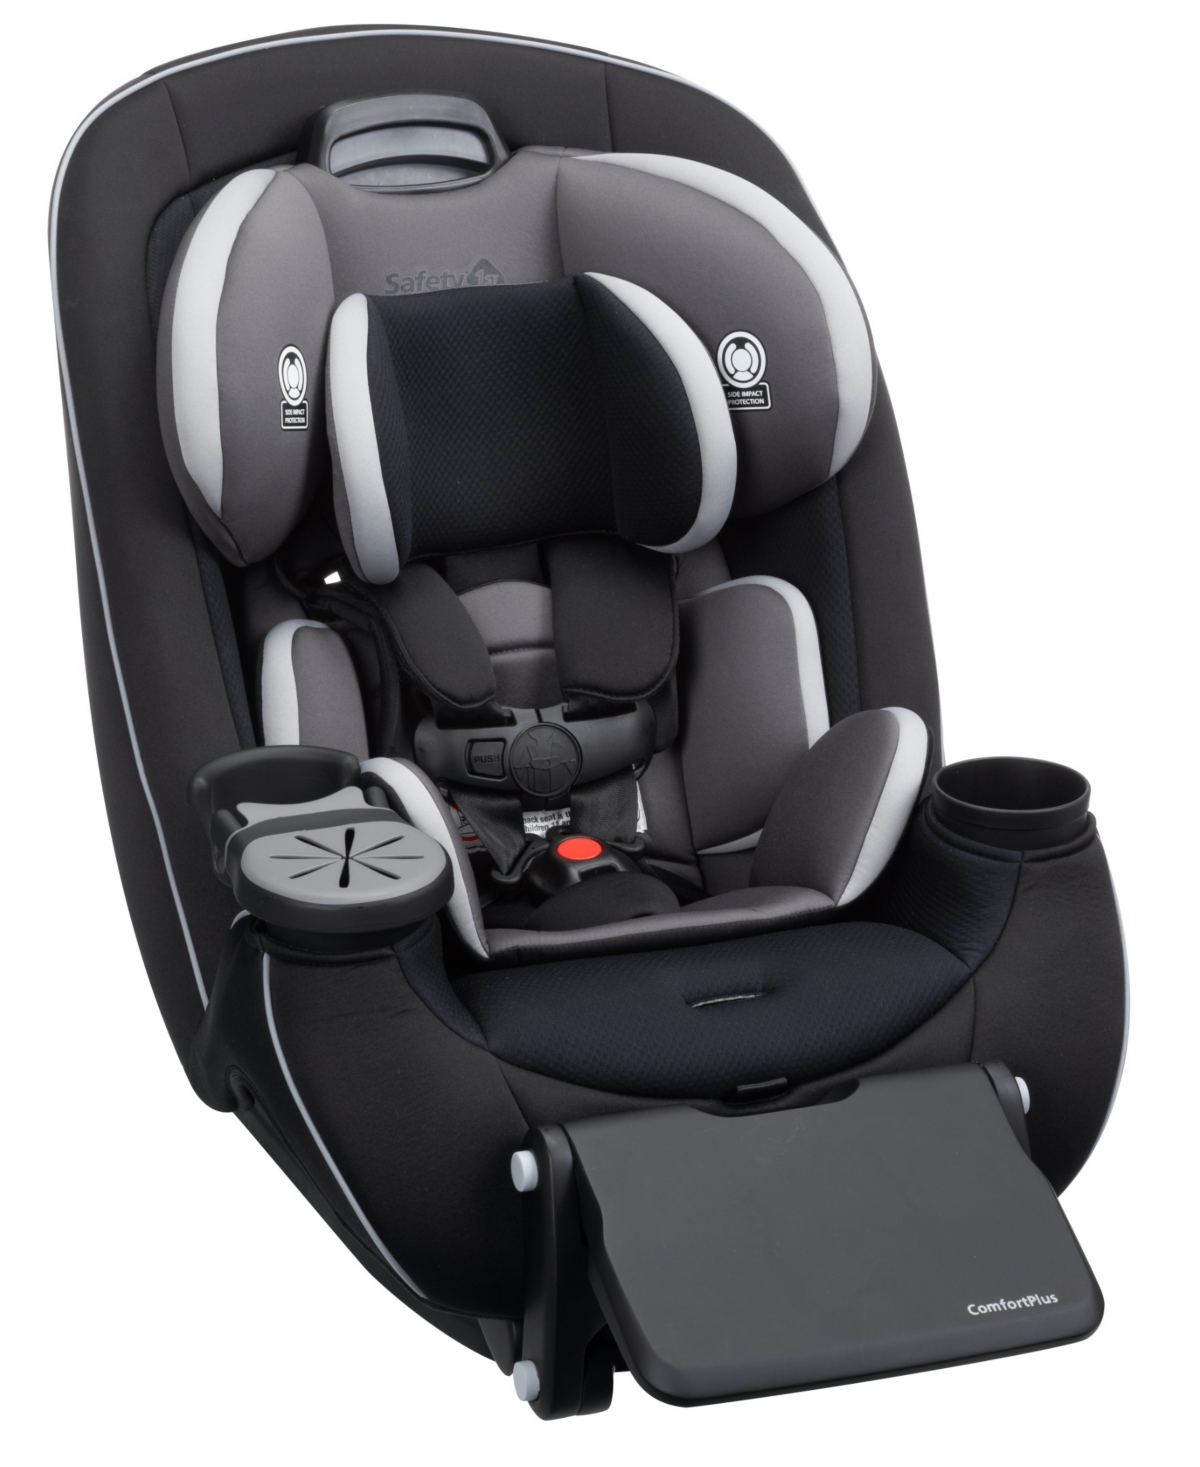 Safety 1st Baby Grow And Go Extend N Ride Lx Convertible One-hand Adjust Car Seat In Mine Shaft